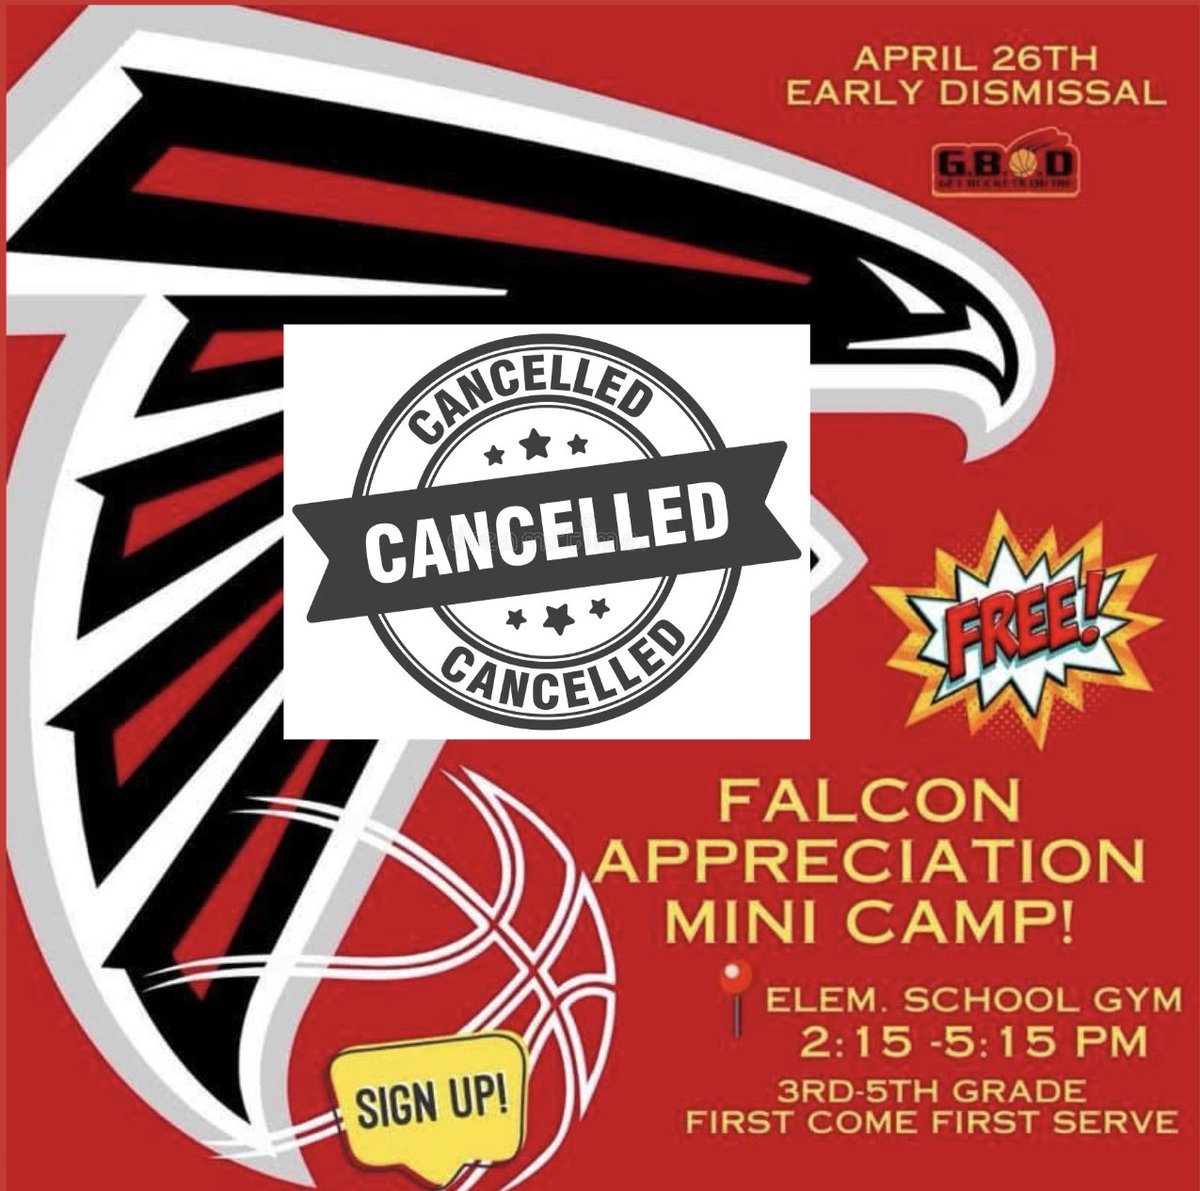 The Falcon Appreciation Mini Camp today has been CANCELLED.